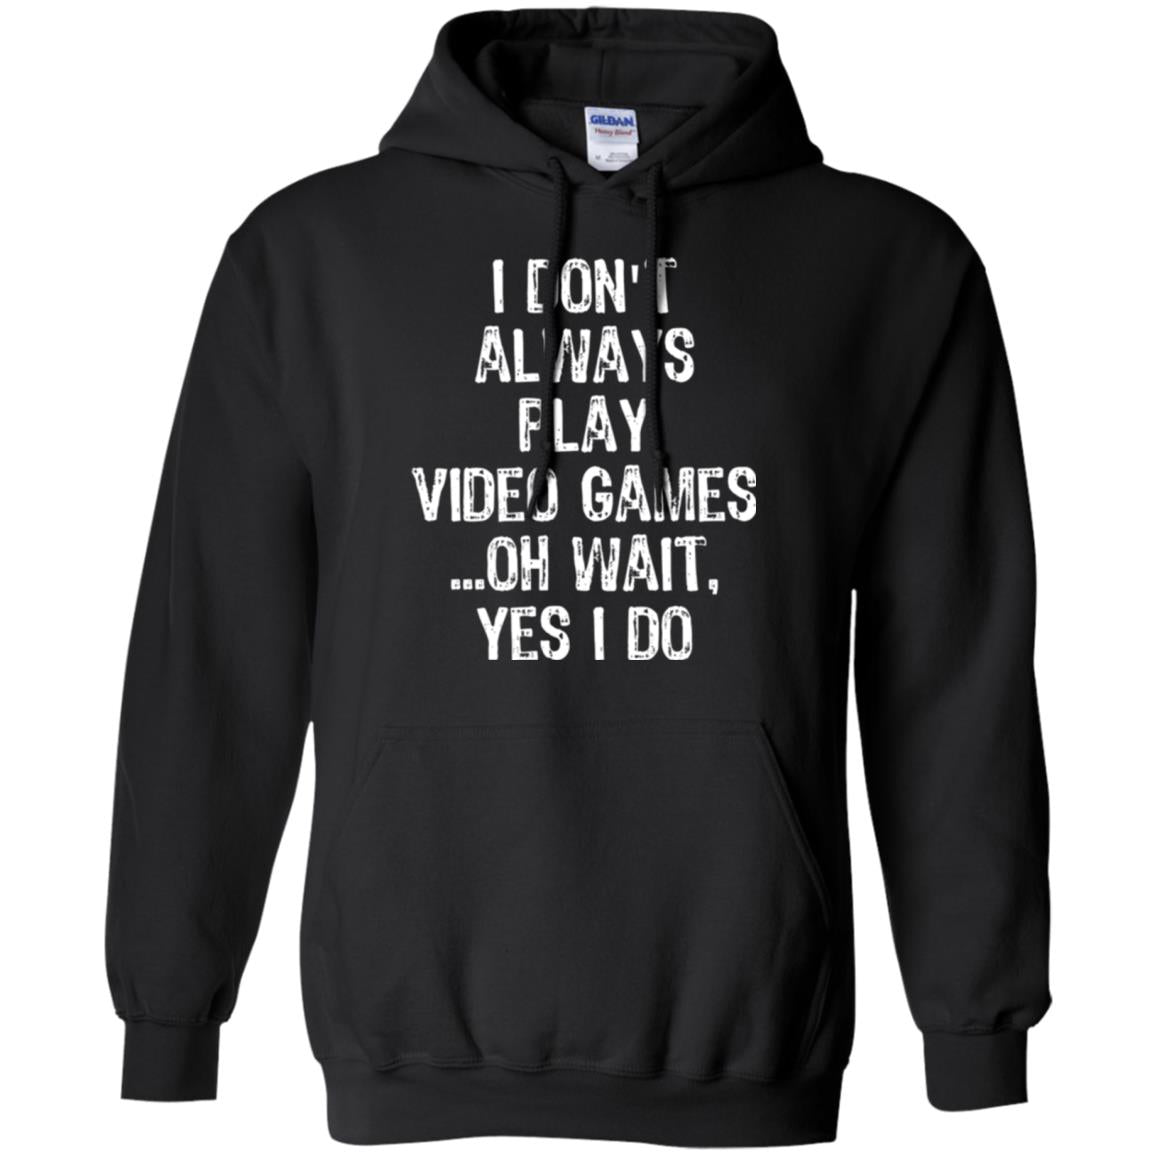 Gamer T-shirt I Don_t Always Play Video Games